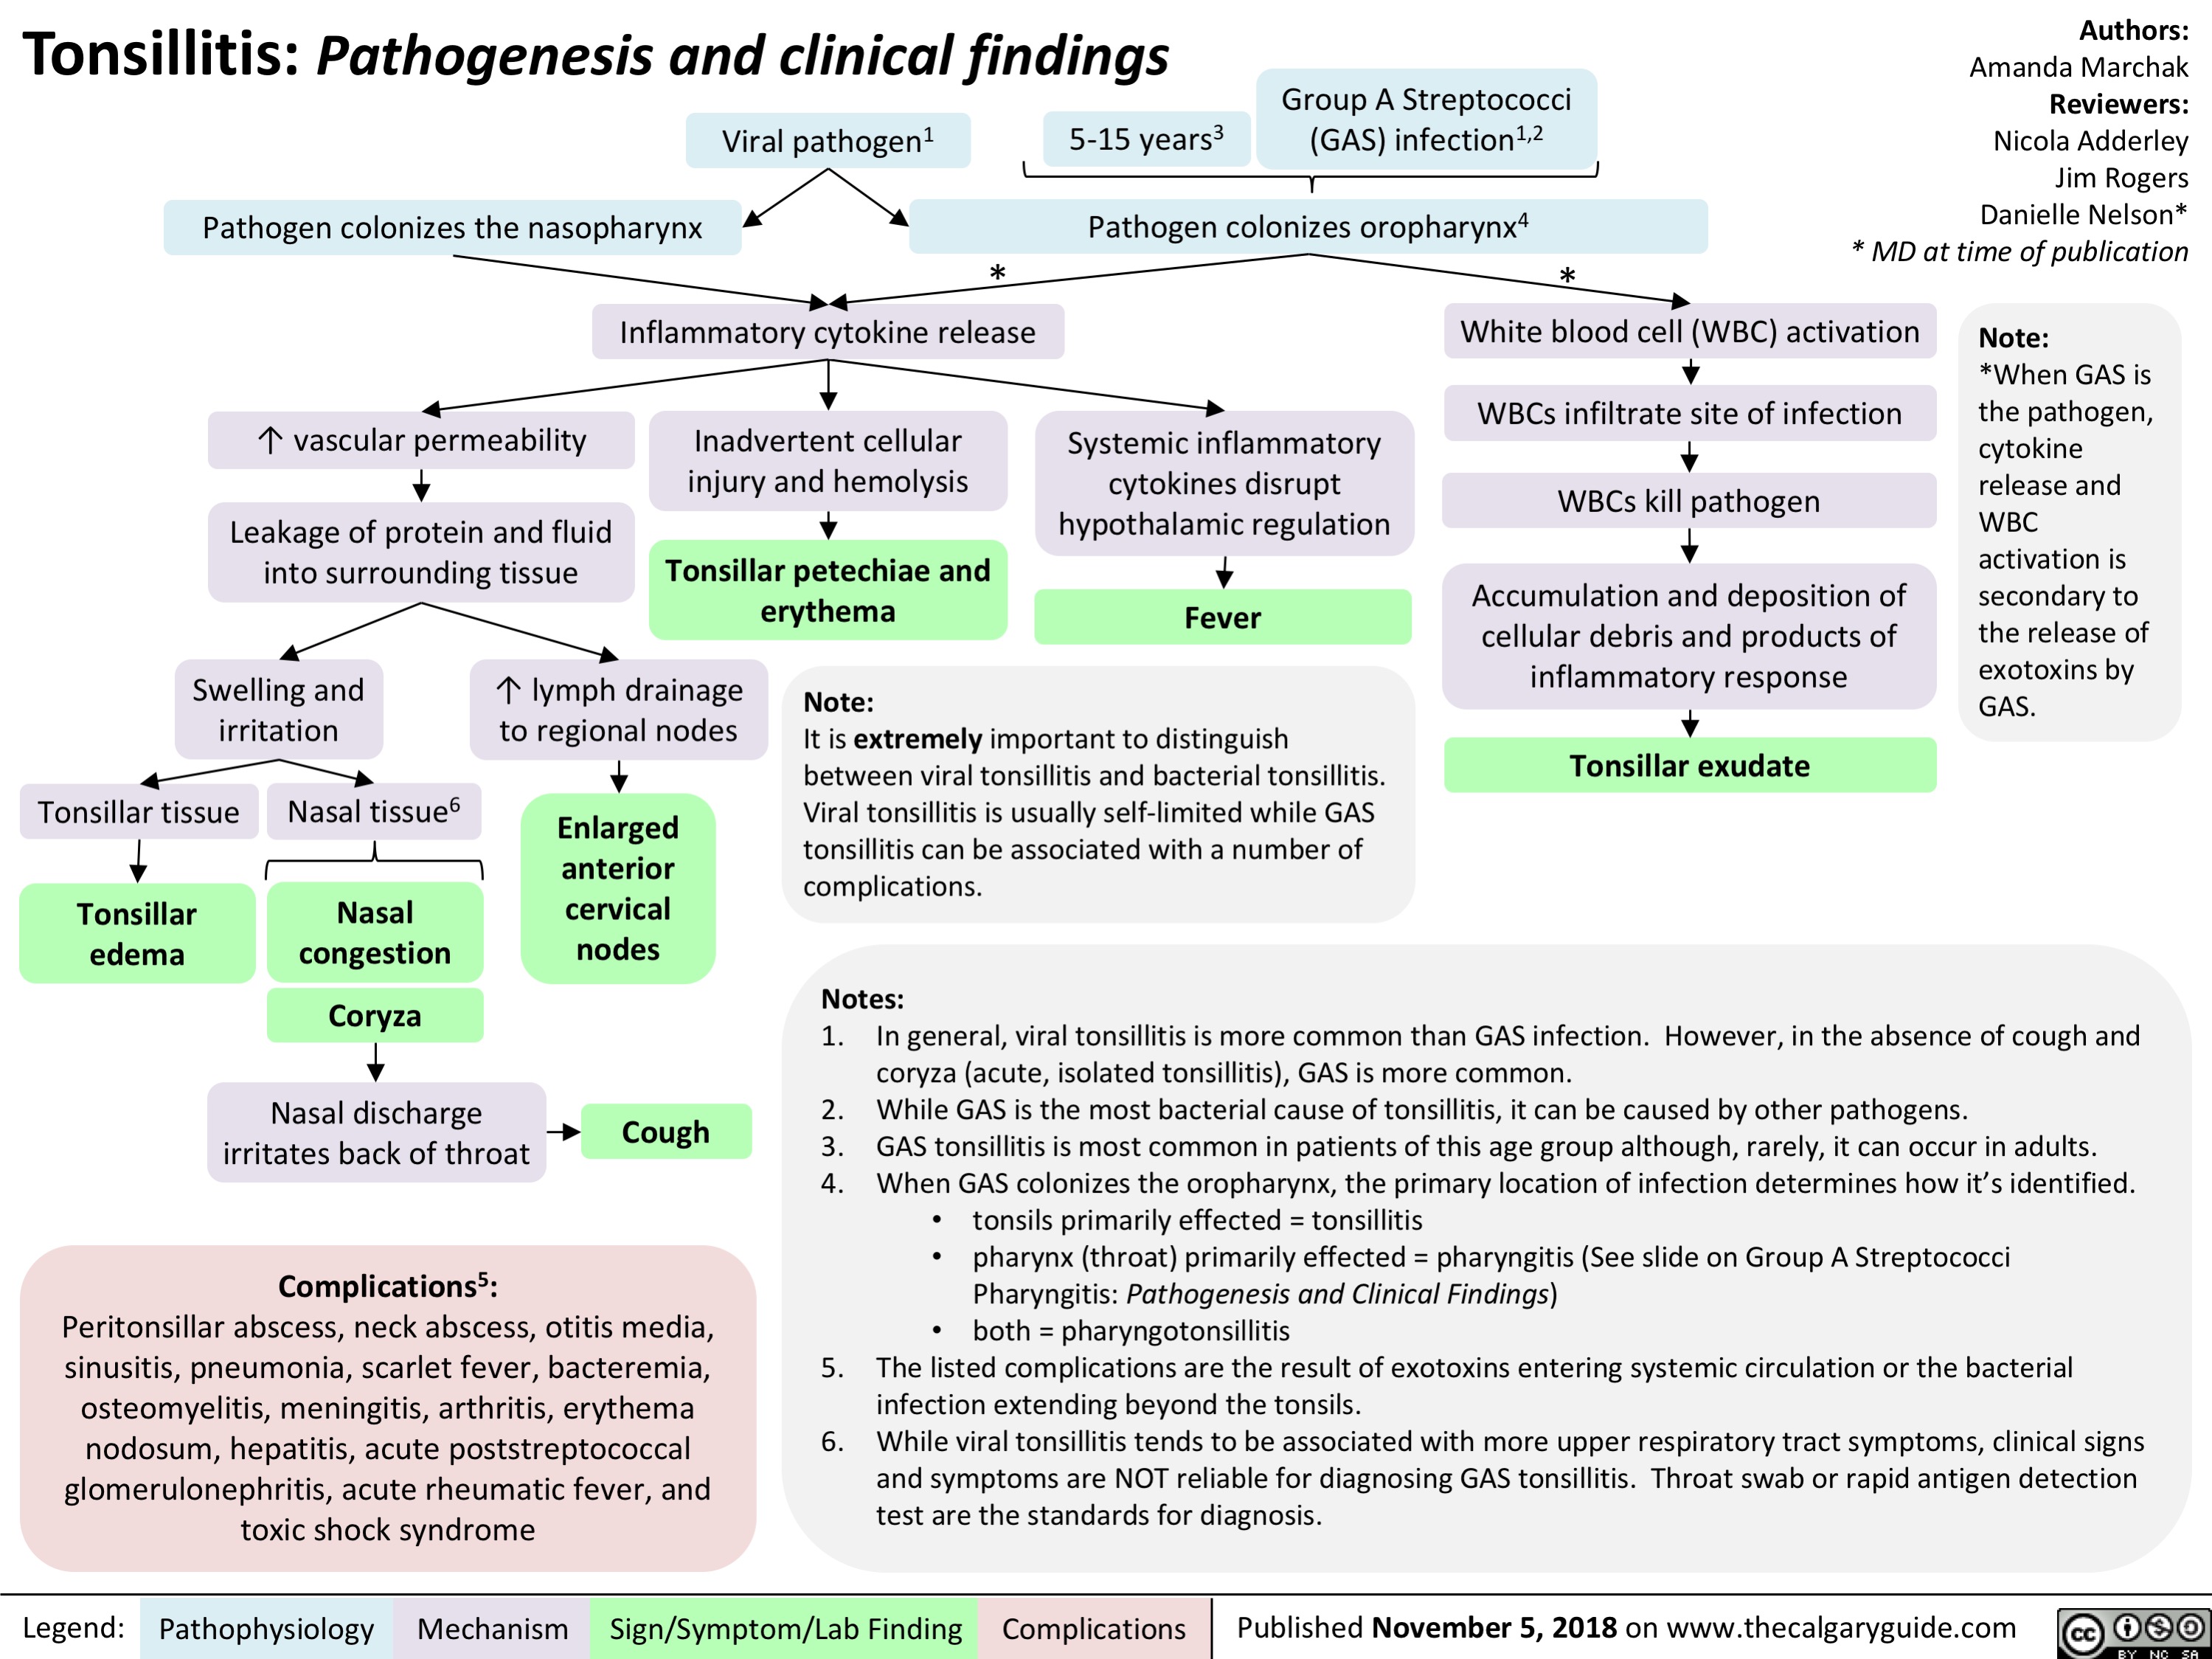 Tonsillitis: Pathogenesis and clinical findings
Group A Streptococci (GAS) infection1,2
Authors:
Amanda Marchak
Reviewers:
Nicola Adderley Jim Rogers Danielle Nelson* * MD at time of publication
   Viral pathogen1
5-15 years3
     Pathogen colonizes the nasopharynx
Pathogen colonizes oropharynx4 **
             ↑ vascular permeability Leakage of protein and fluid
into surrounding tissue
Inflammatory cytokine release
Inadvertent cellular injury and hemolysis
Tonsillar petechiae and erythema
Systemic inflammatory cytokines disrupt hypothalamic regulation
Fever
White blood cell (WBC) activation WBCs infiltrate site of infection
WBCs kill pathogen
Accumulation and deposition of cellular debris and products of inflammatory response
Tonsillar exudate
Note:
*When GAS is the pathogen, cytokine release and WBC activation is secondary to the release of exotoxins by GAS.
               Swelling and irritation
↑ lymph drainage to regional nodes
Enlarged anterior cervical nodes
Cough
Note:
It is extremely important to distinguish between viral tonsillitis and bacterial tonsillitis. Viral tonsillitis is usually self-limited while GAS tonsillitis can be associated with a number of complications.
Notes:
       Tonsillar tissue
Tonsillar edema
Nasal tissue6
Nasal congestion
Coryza
Nasal discharge irritates back of throat
Complications5:
            Peritonsillar abscess, neck abscess, otitis media, sinusitis, pneumonia, scarlet fever, bacteremia, osteomyelitis, meningitis, arthritis, erythema nodosum, hepatitis, acute poststreptococcal glomerulonephritis, acute rheumatic fever, and toxic shock syndrome
1. In general, viral tonsillitis is more common than GAS infection. However, in the absence of cough and coryza (acute, isolated tonsillitis), GAS is more common.
2. While GAS is the most bacterial cause of tonsillitis, it can be caused by other pathogens.
3. GAS tonsillitis is most common in patients of this age group although, rarely, it can occur in adults.
4. When GAS colonizes the oropharynx, the primary location of infection determines how it’s identified.
• tonsils primarily effected = tonsillitis
• pharynx (throat) primarily effected = pharyngitis (See slide on Group A Streptococci
Pharyngitis: Pathogenesis and Clinical Findings) • both = pharyngotonsillitis
5. The listed complications are the result of exotoxins entering systemic circulation or the bacterial infection extending beyond the tonsils.
6. While viral tonsillitis tends to be associated with more upper respiratory tract symptoms, clinical signs and symptoms are NOT reliable for diagnosing GAS tonsillitis. Throat swab or rapid antigen detection test are the standards for diagnosis.
 Legend:
 Pathophysiology
 Mechanism
Sign/Symptom/Lab Finding
  Complications
Published November 5, 2018 on www.thecalgaryguide.com
   